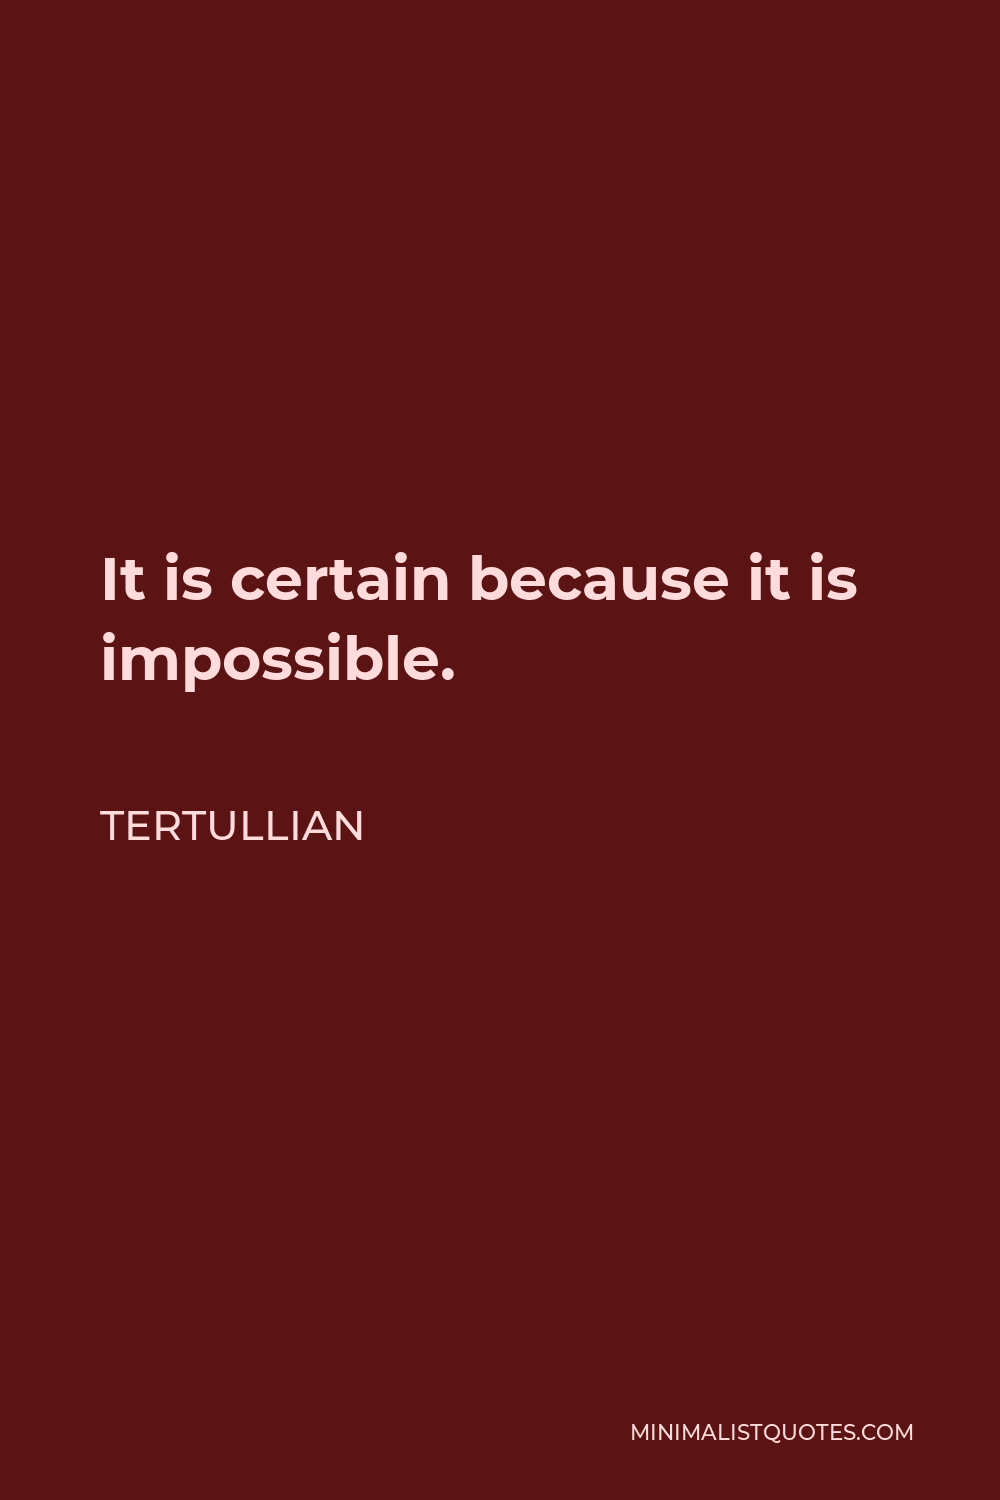 Tertullian Quote - It is certain because it is impossible.